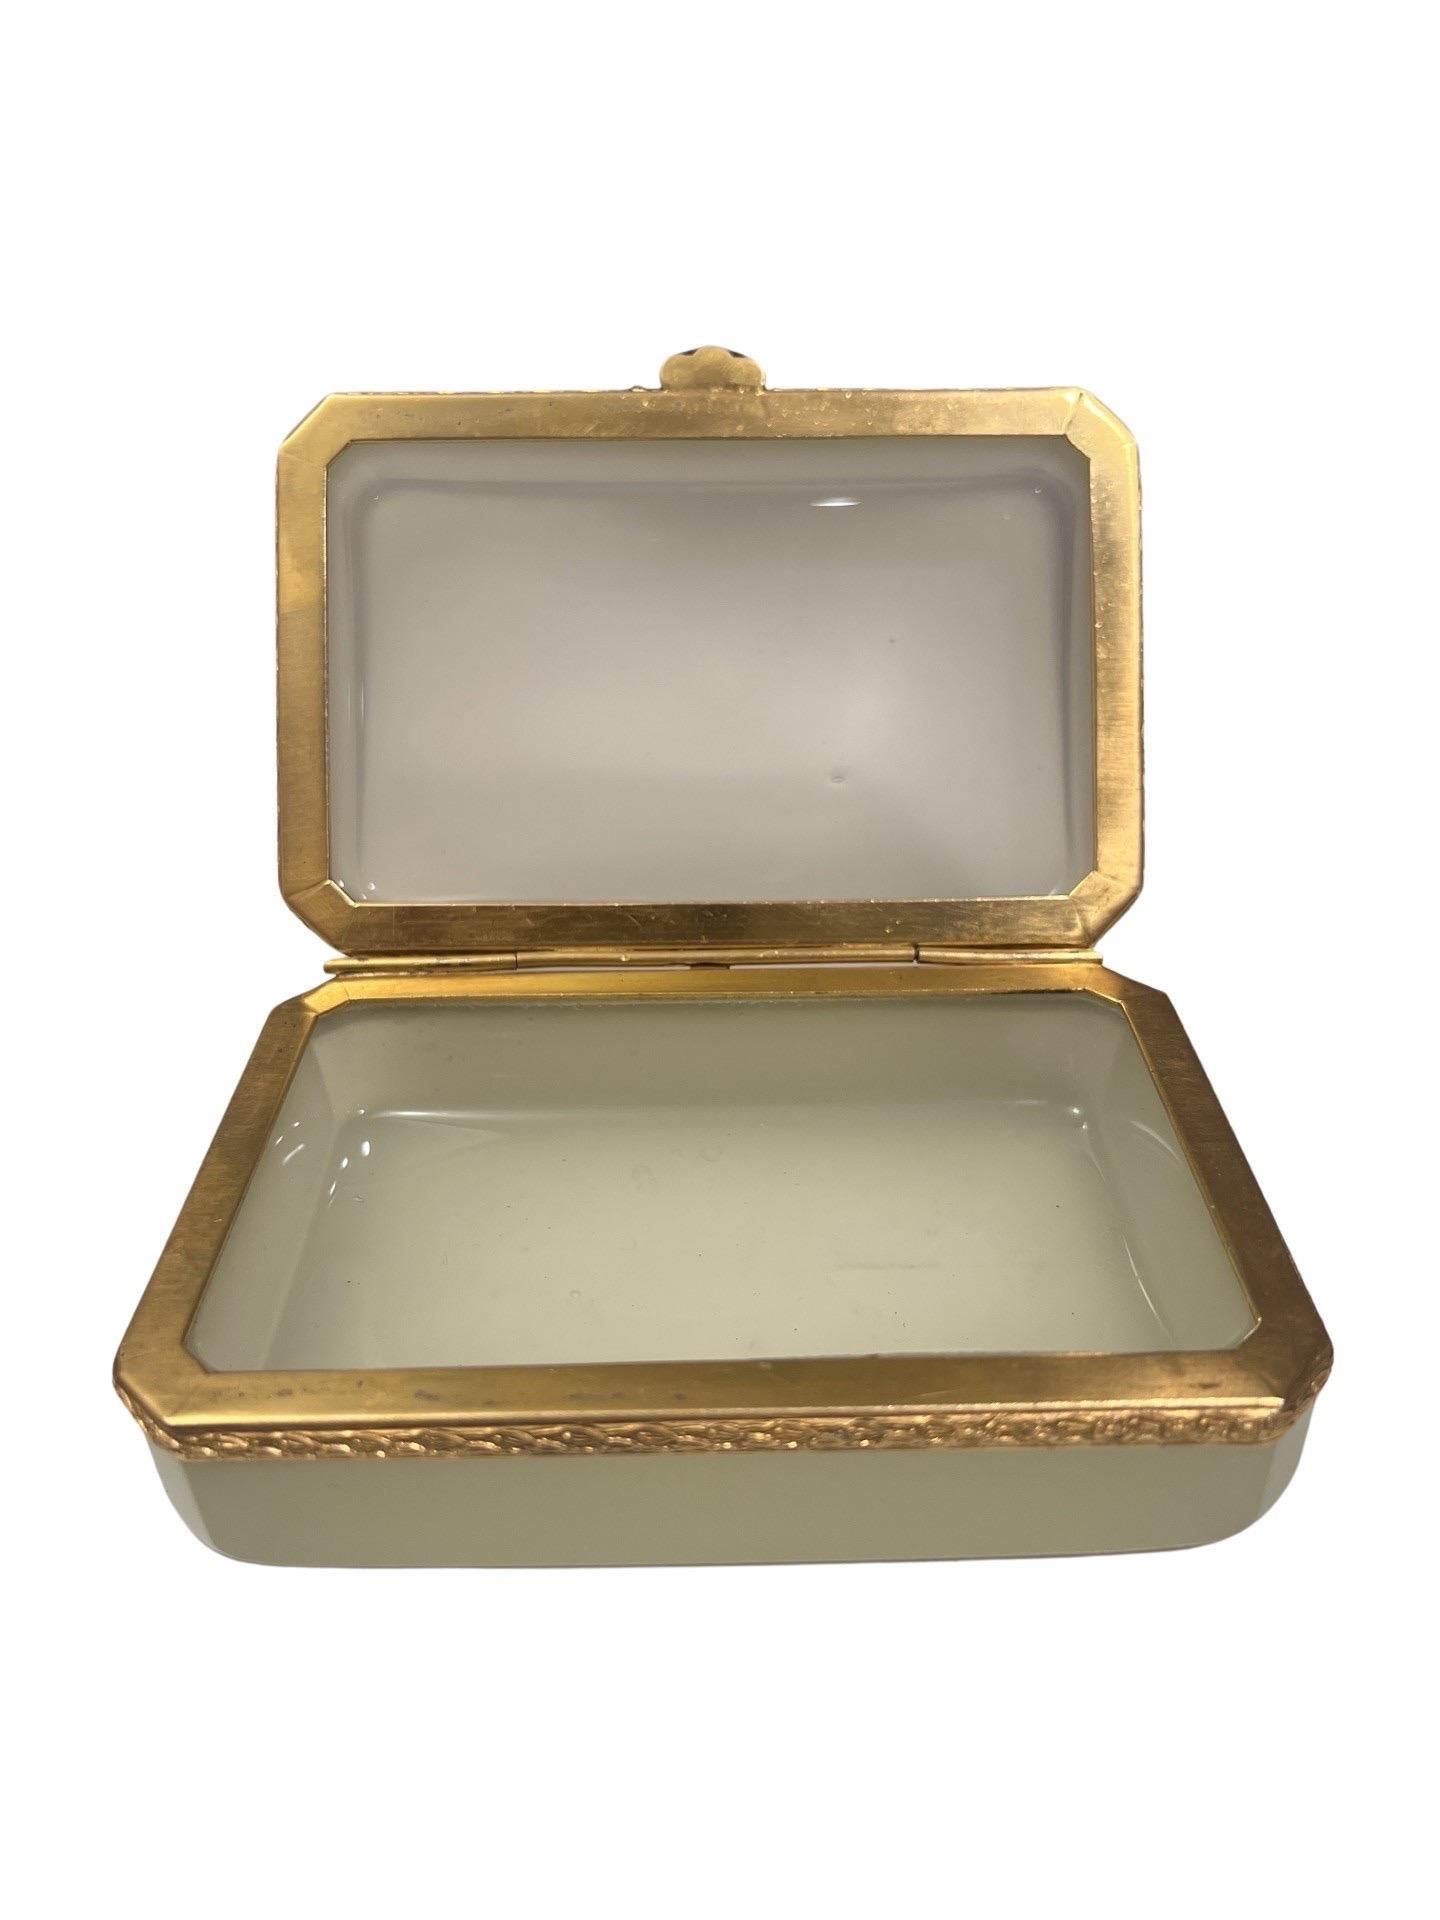 Antique French Opaline Glass Casket Having a Hinged Doré Bronze Band For Sale 1